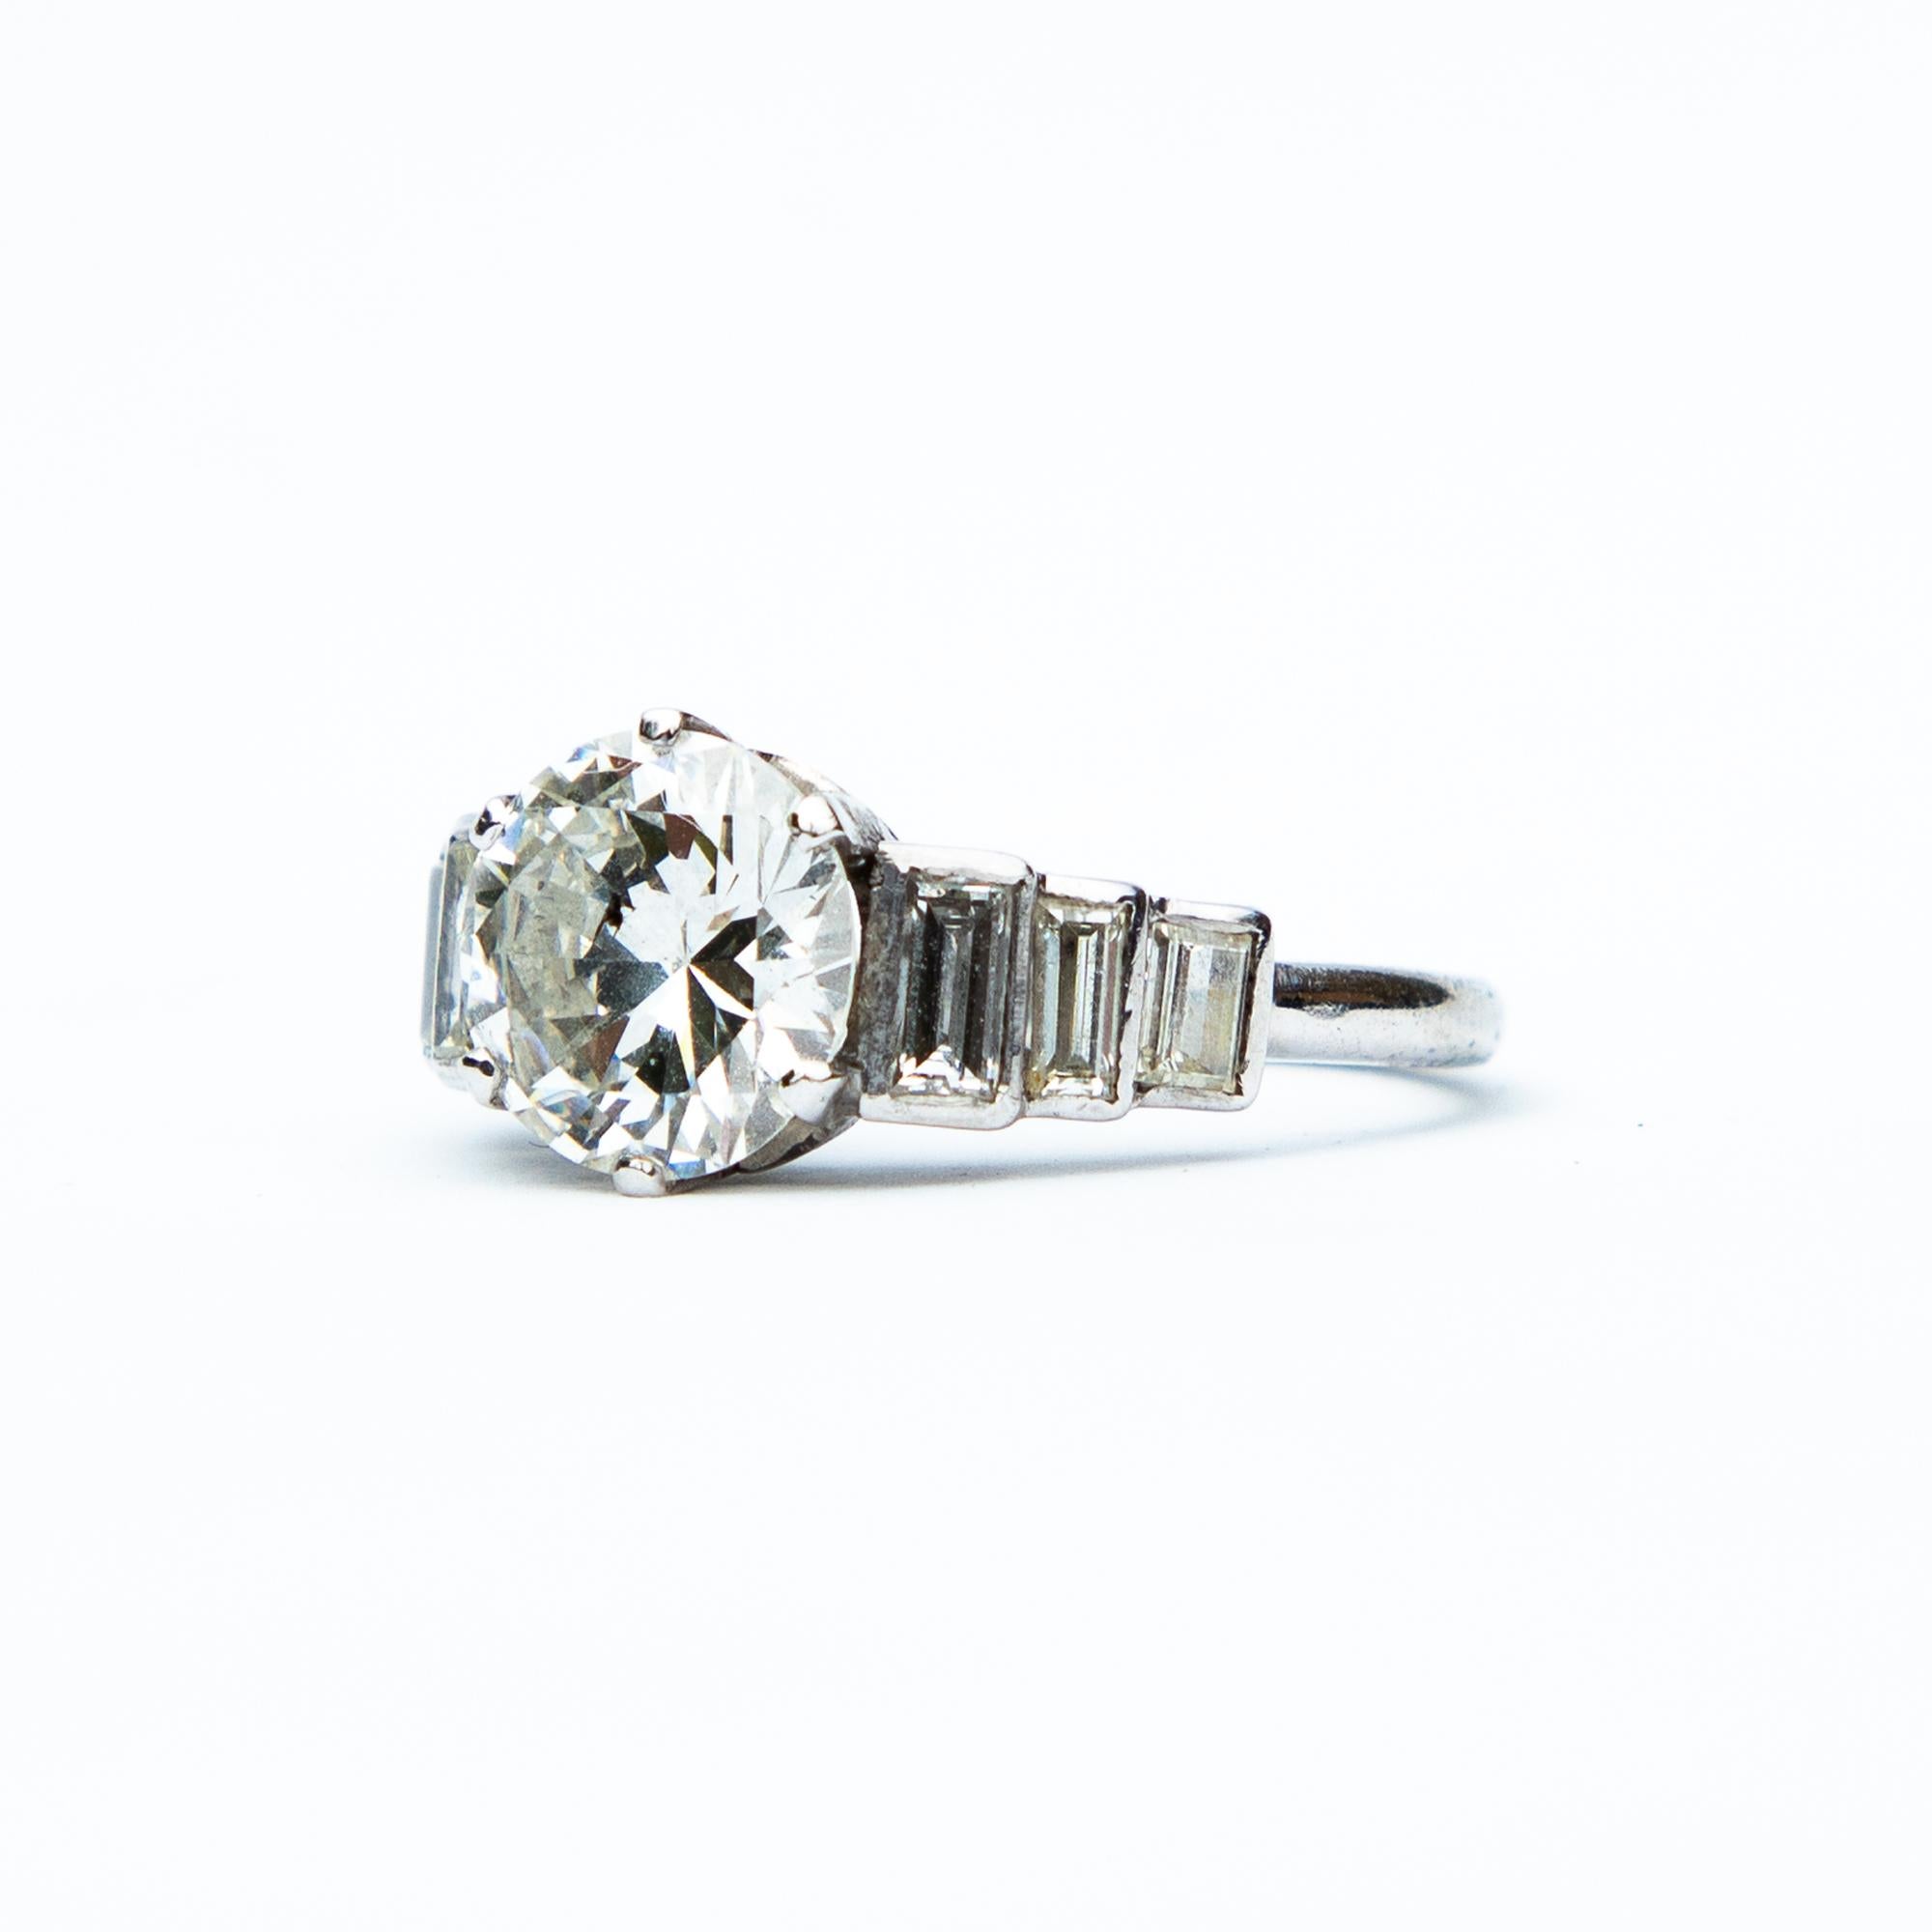 This a stunning Art Deco inspired solitaire platinum and diamond ring. The central modern brilliant cut diamond is beautifully complimented with baguette cut diamond stepped shoulders. There is one small inclusion to the top of the central stone.